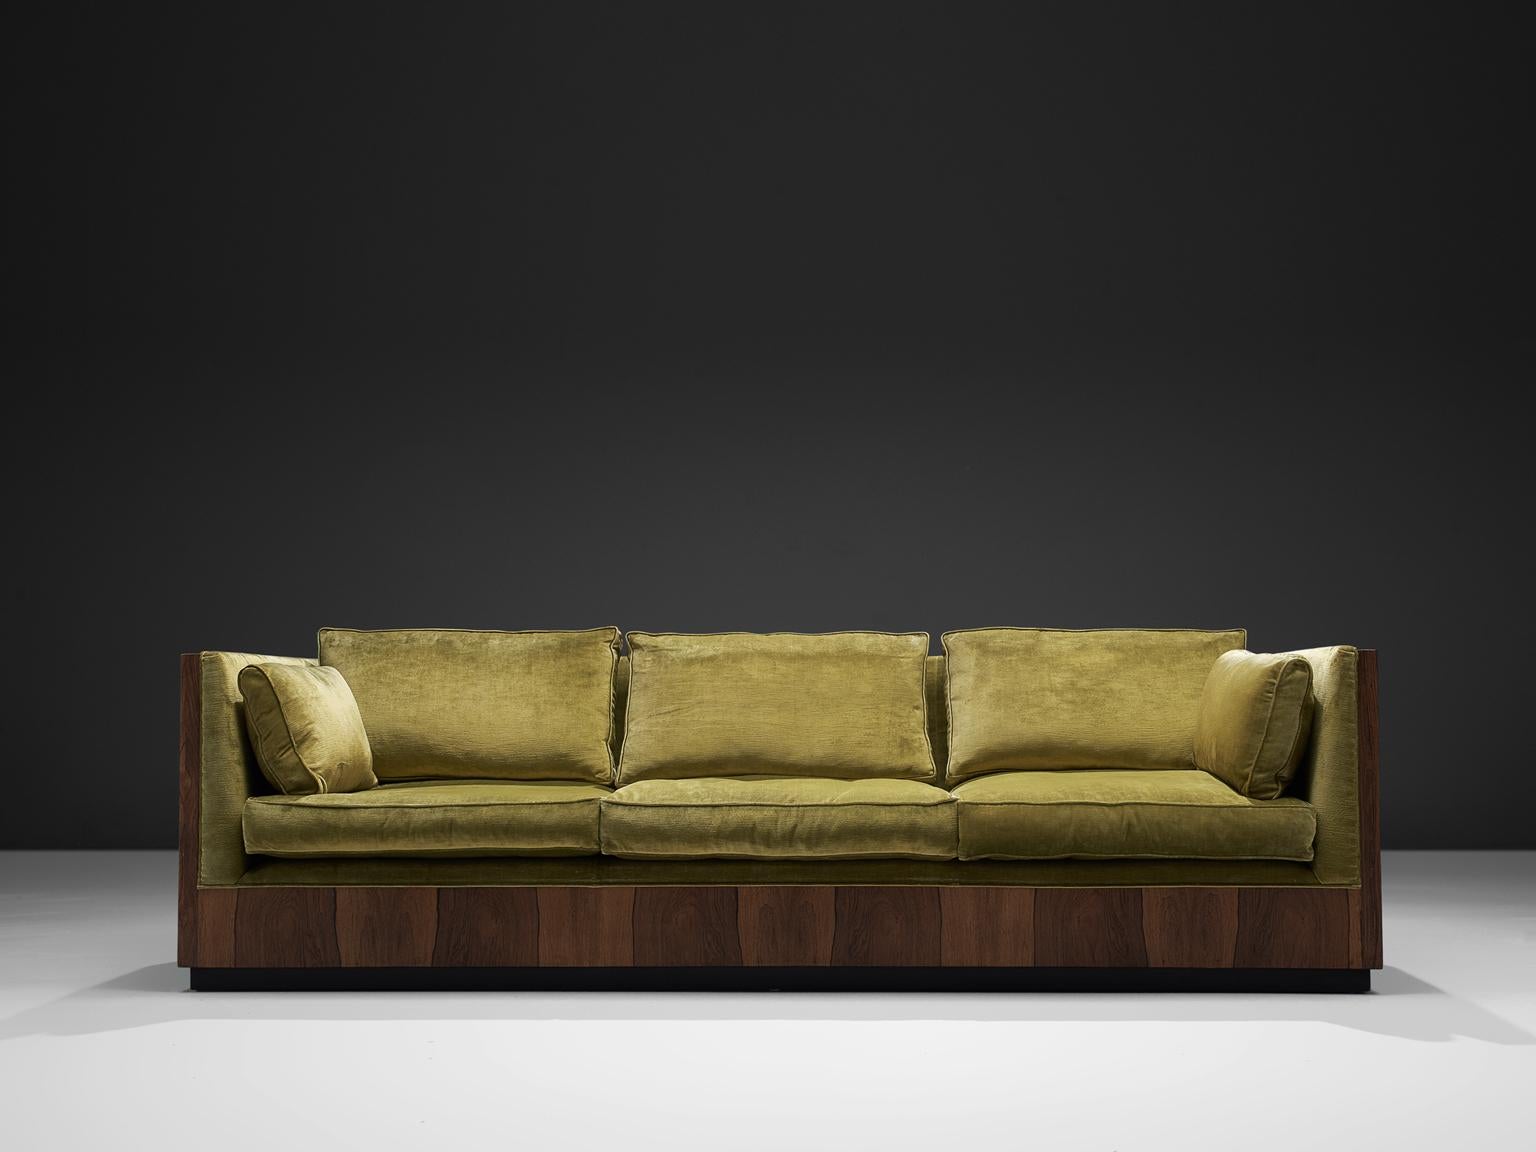 Milo Baughman, sofa, green velvet, rosewood, United States, circa 1965

This three-seat 'basket' sofas is designed, circa 1965. The soft colored cushions fall perfectly in the rosewood frame of this settee. The design of this sofa is very